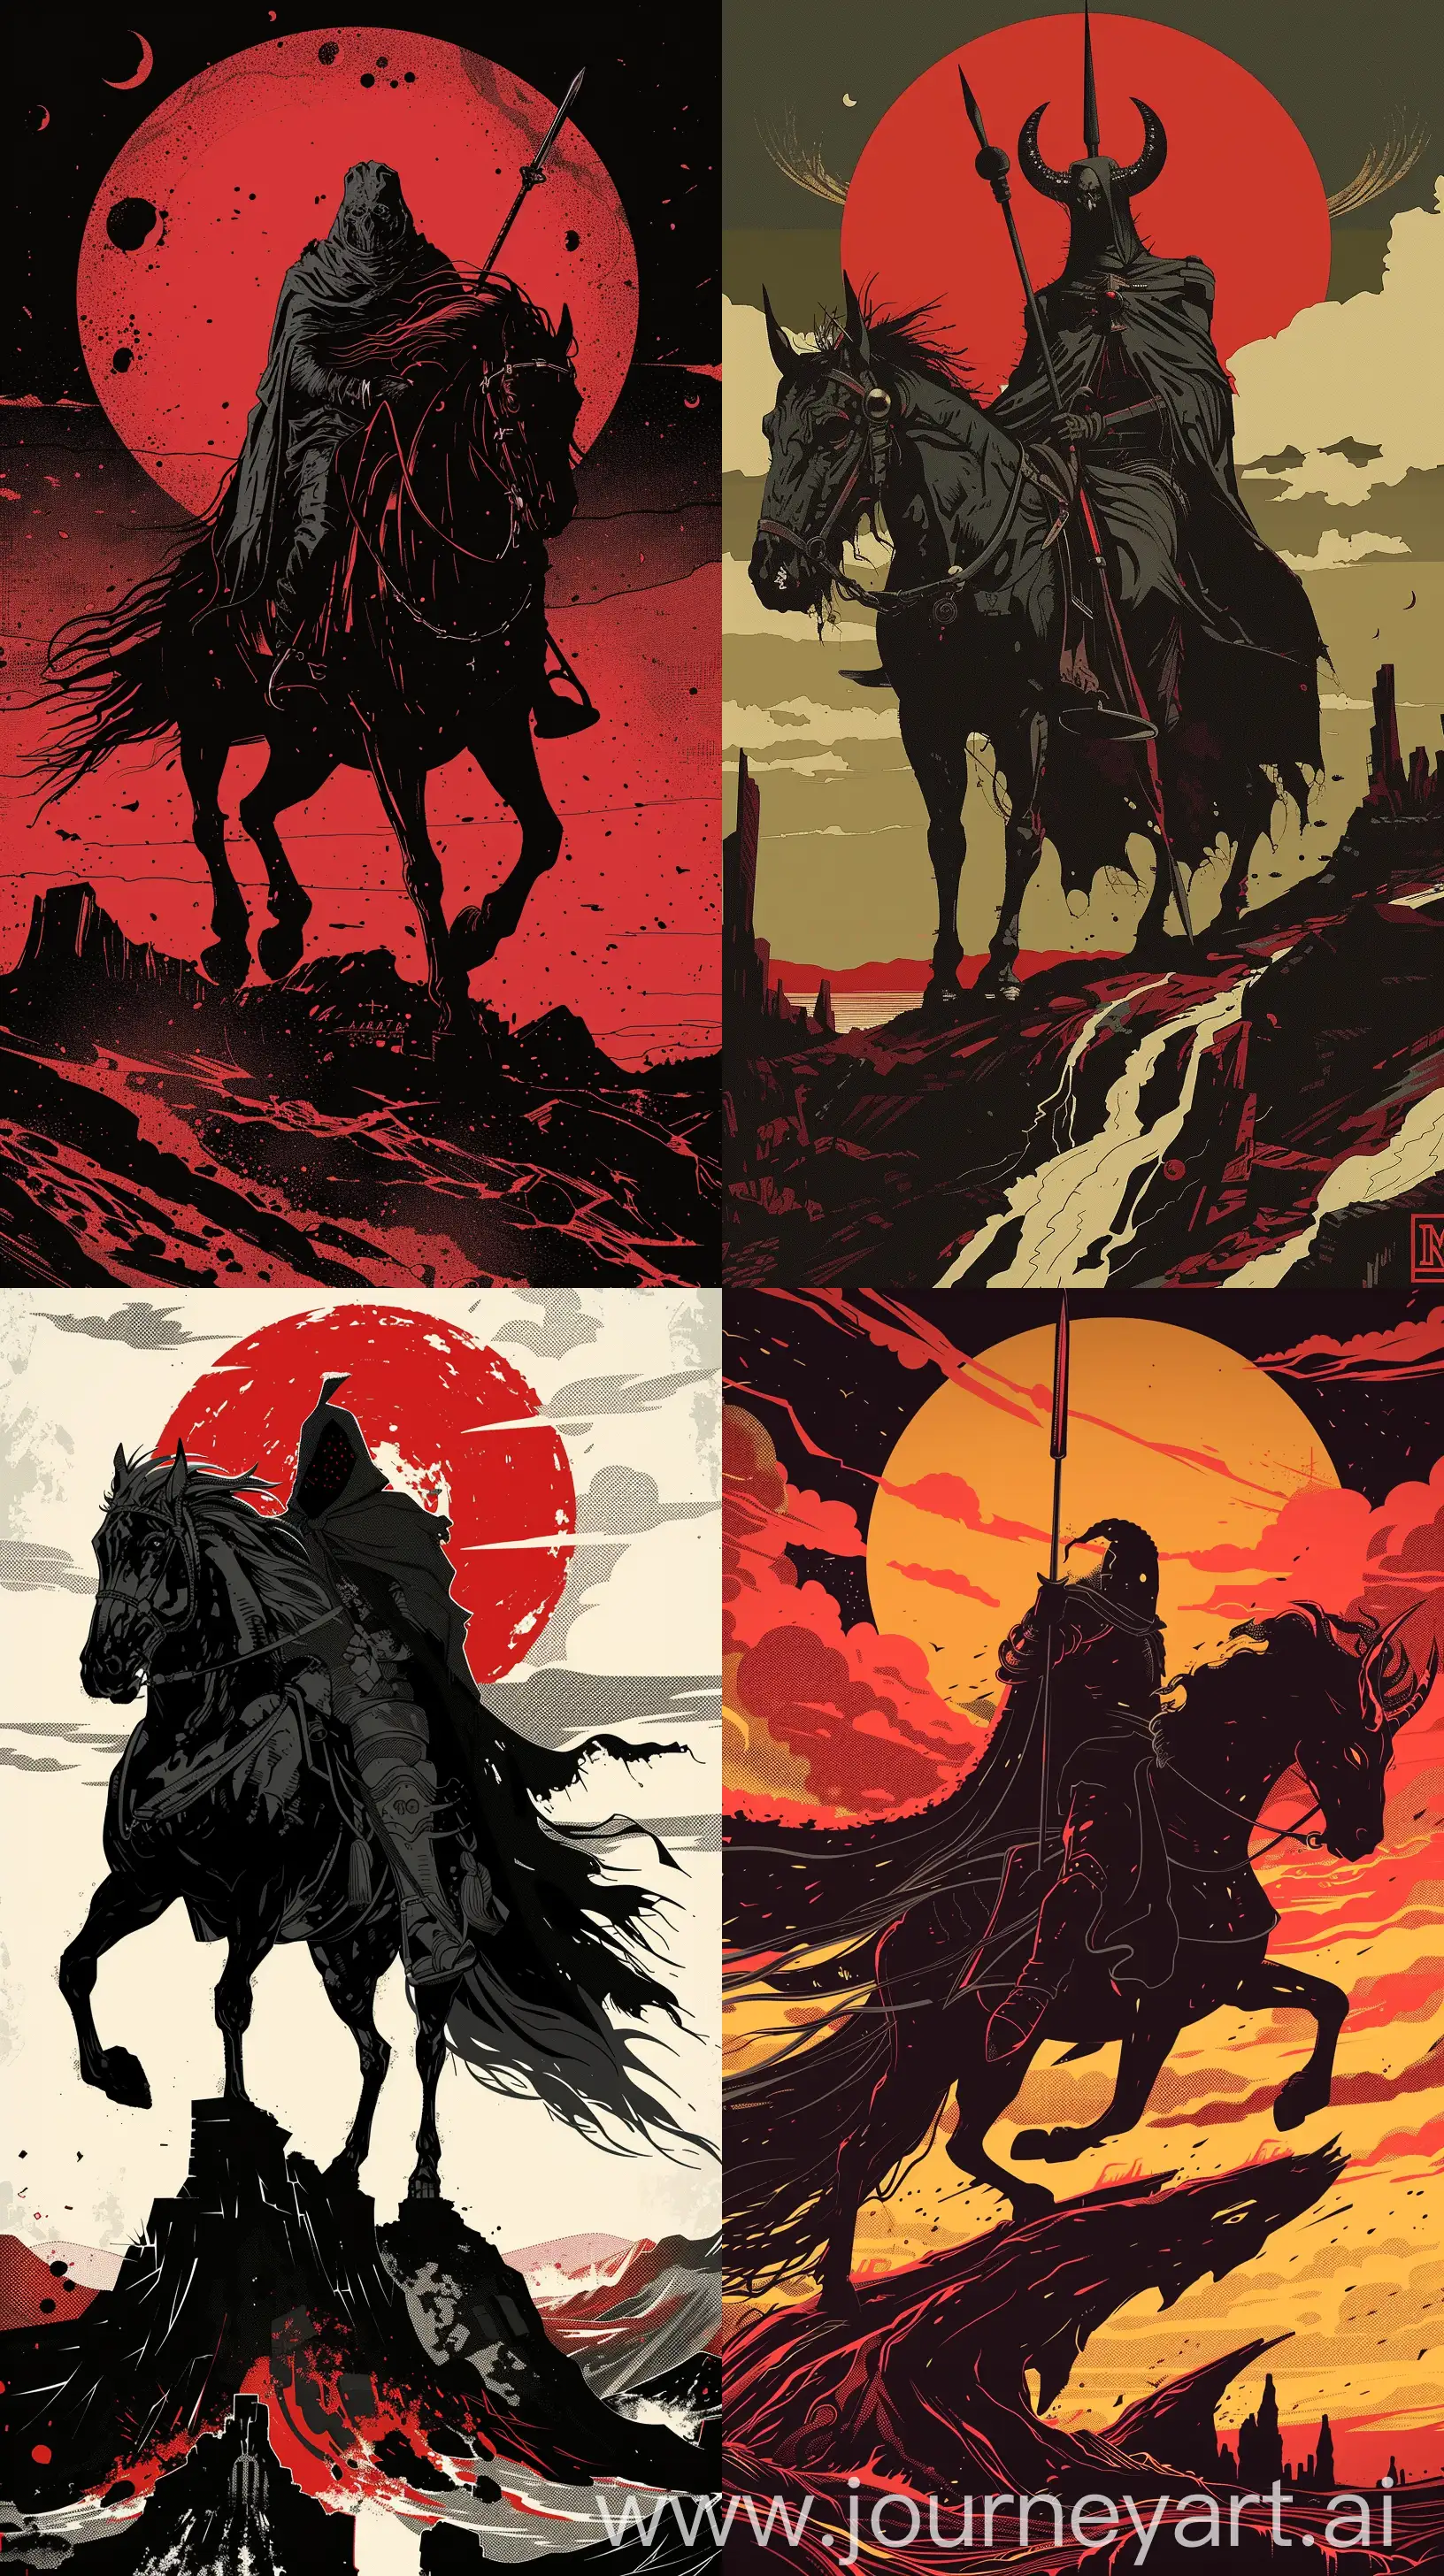 Depict a reimagined version of one of the Four Horsemen of the Apocalypse, adhering to Mignola's aesthetic. The character should be striking, with solid blacks and a minimalistic approach, set against a landscape that reflects the horseman's domain, whether it be war, famine, pestilence, or death. Phone wallpaper 8k uhd Maximalist Details, --ar 9:16